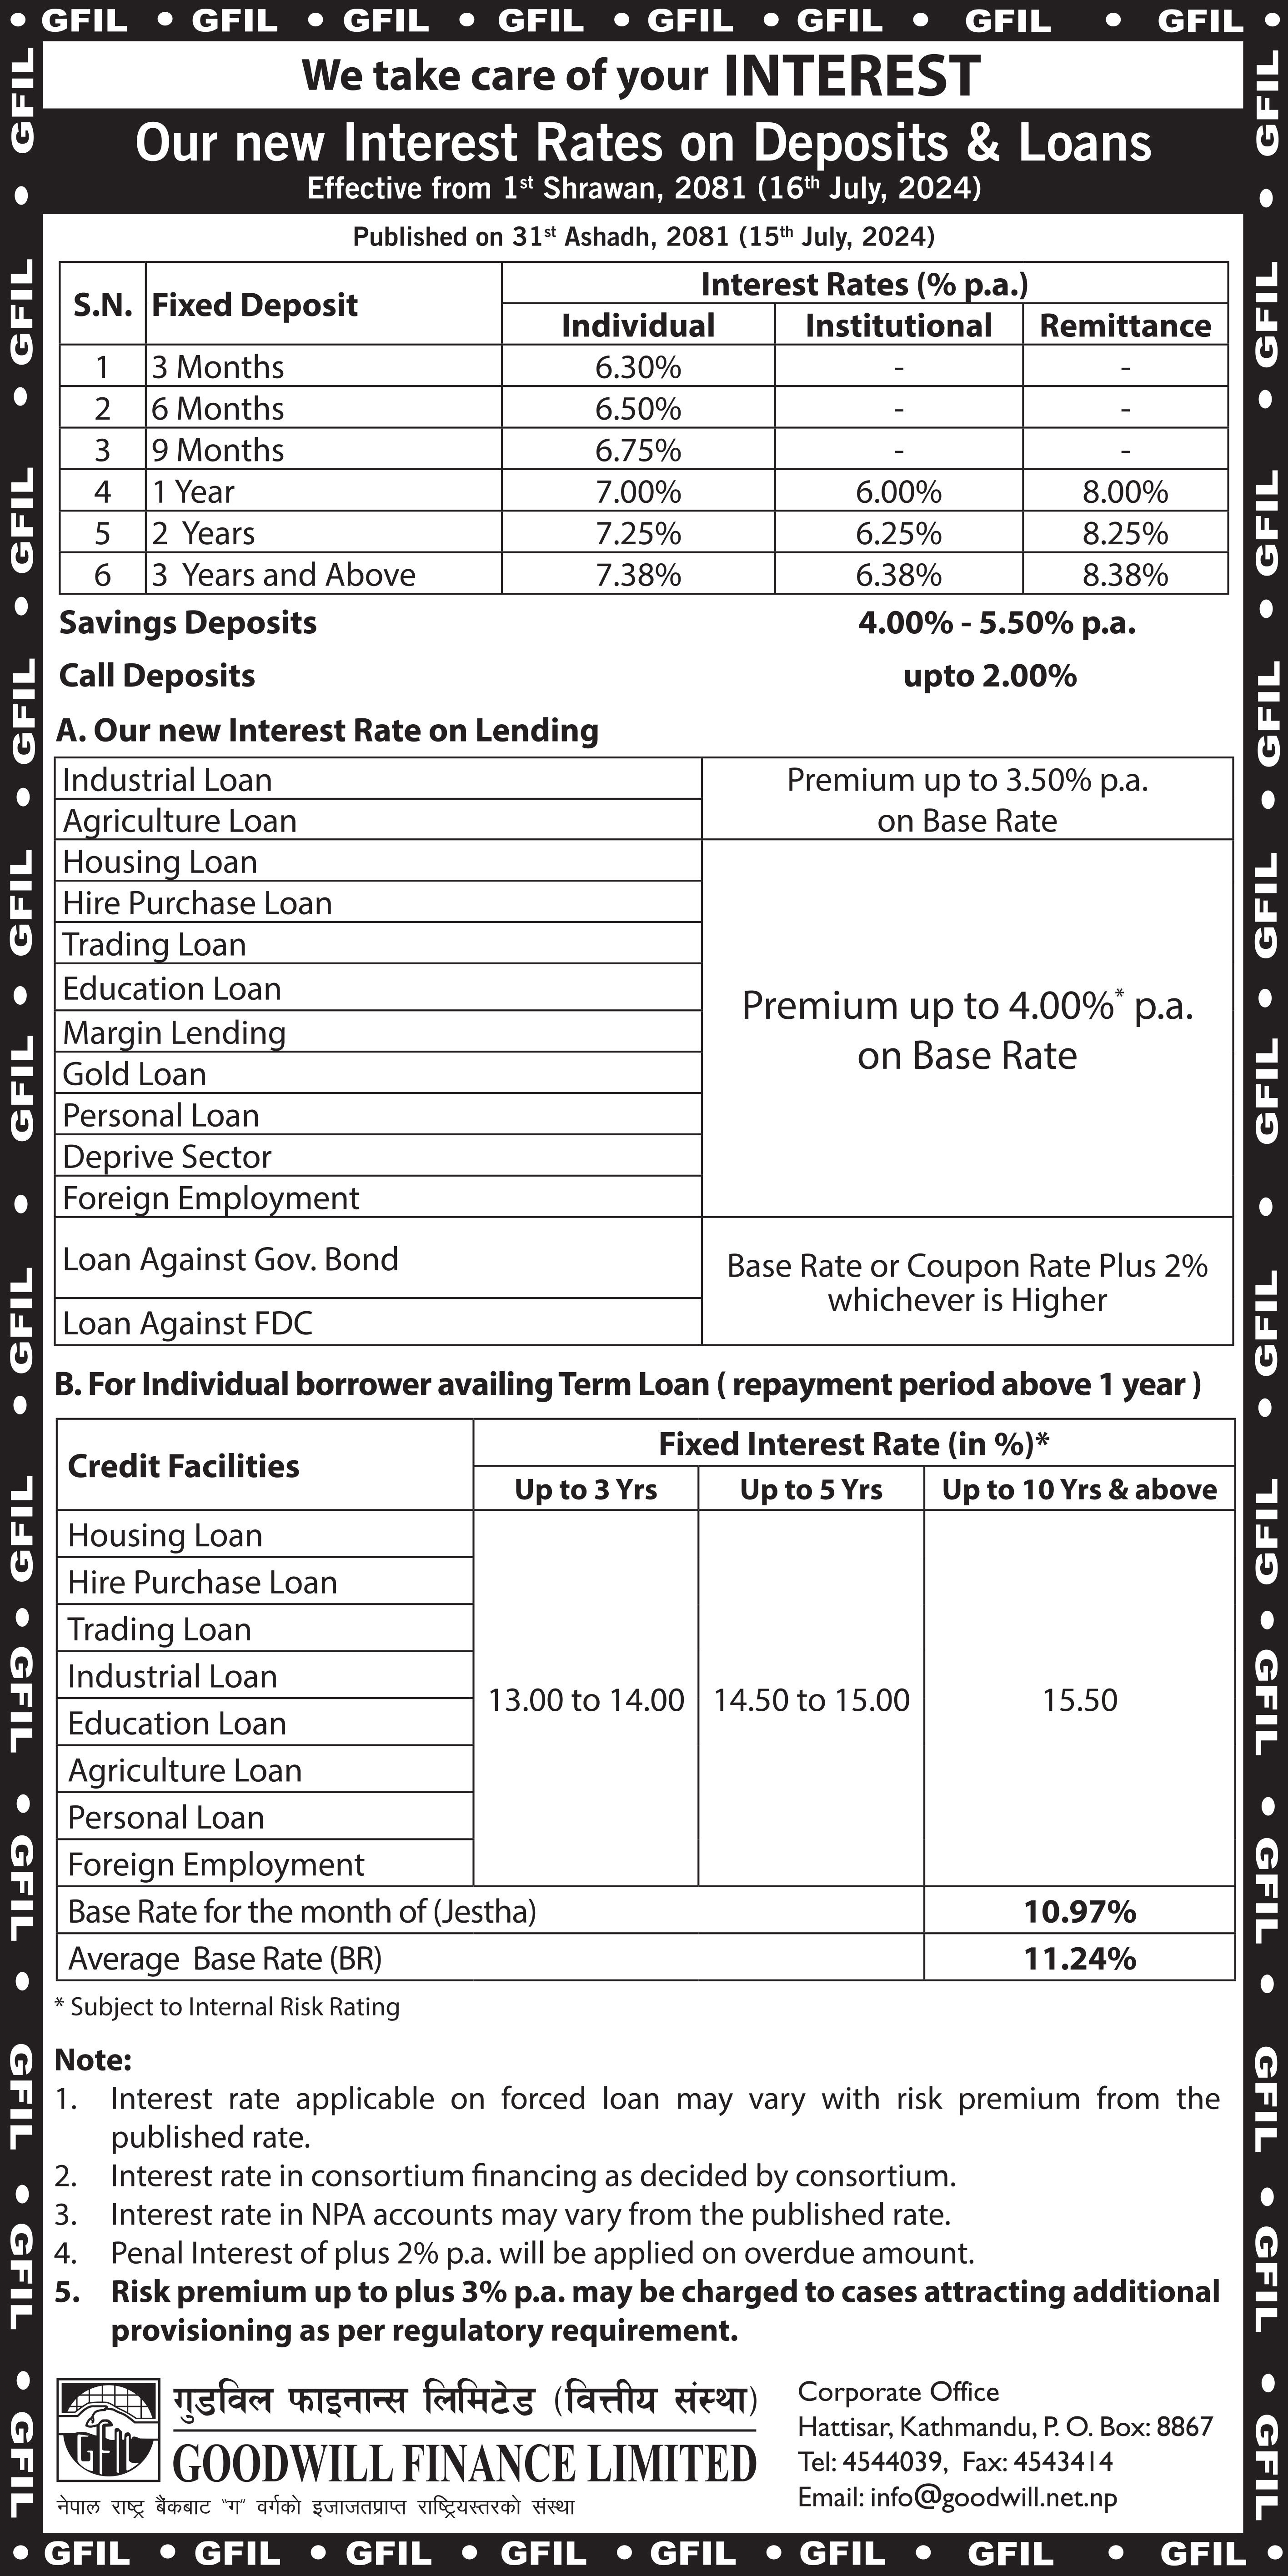 Interest rate on Deposit and loans effective from 16th Jun, 2024	